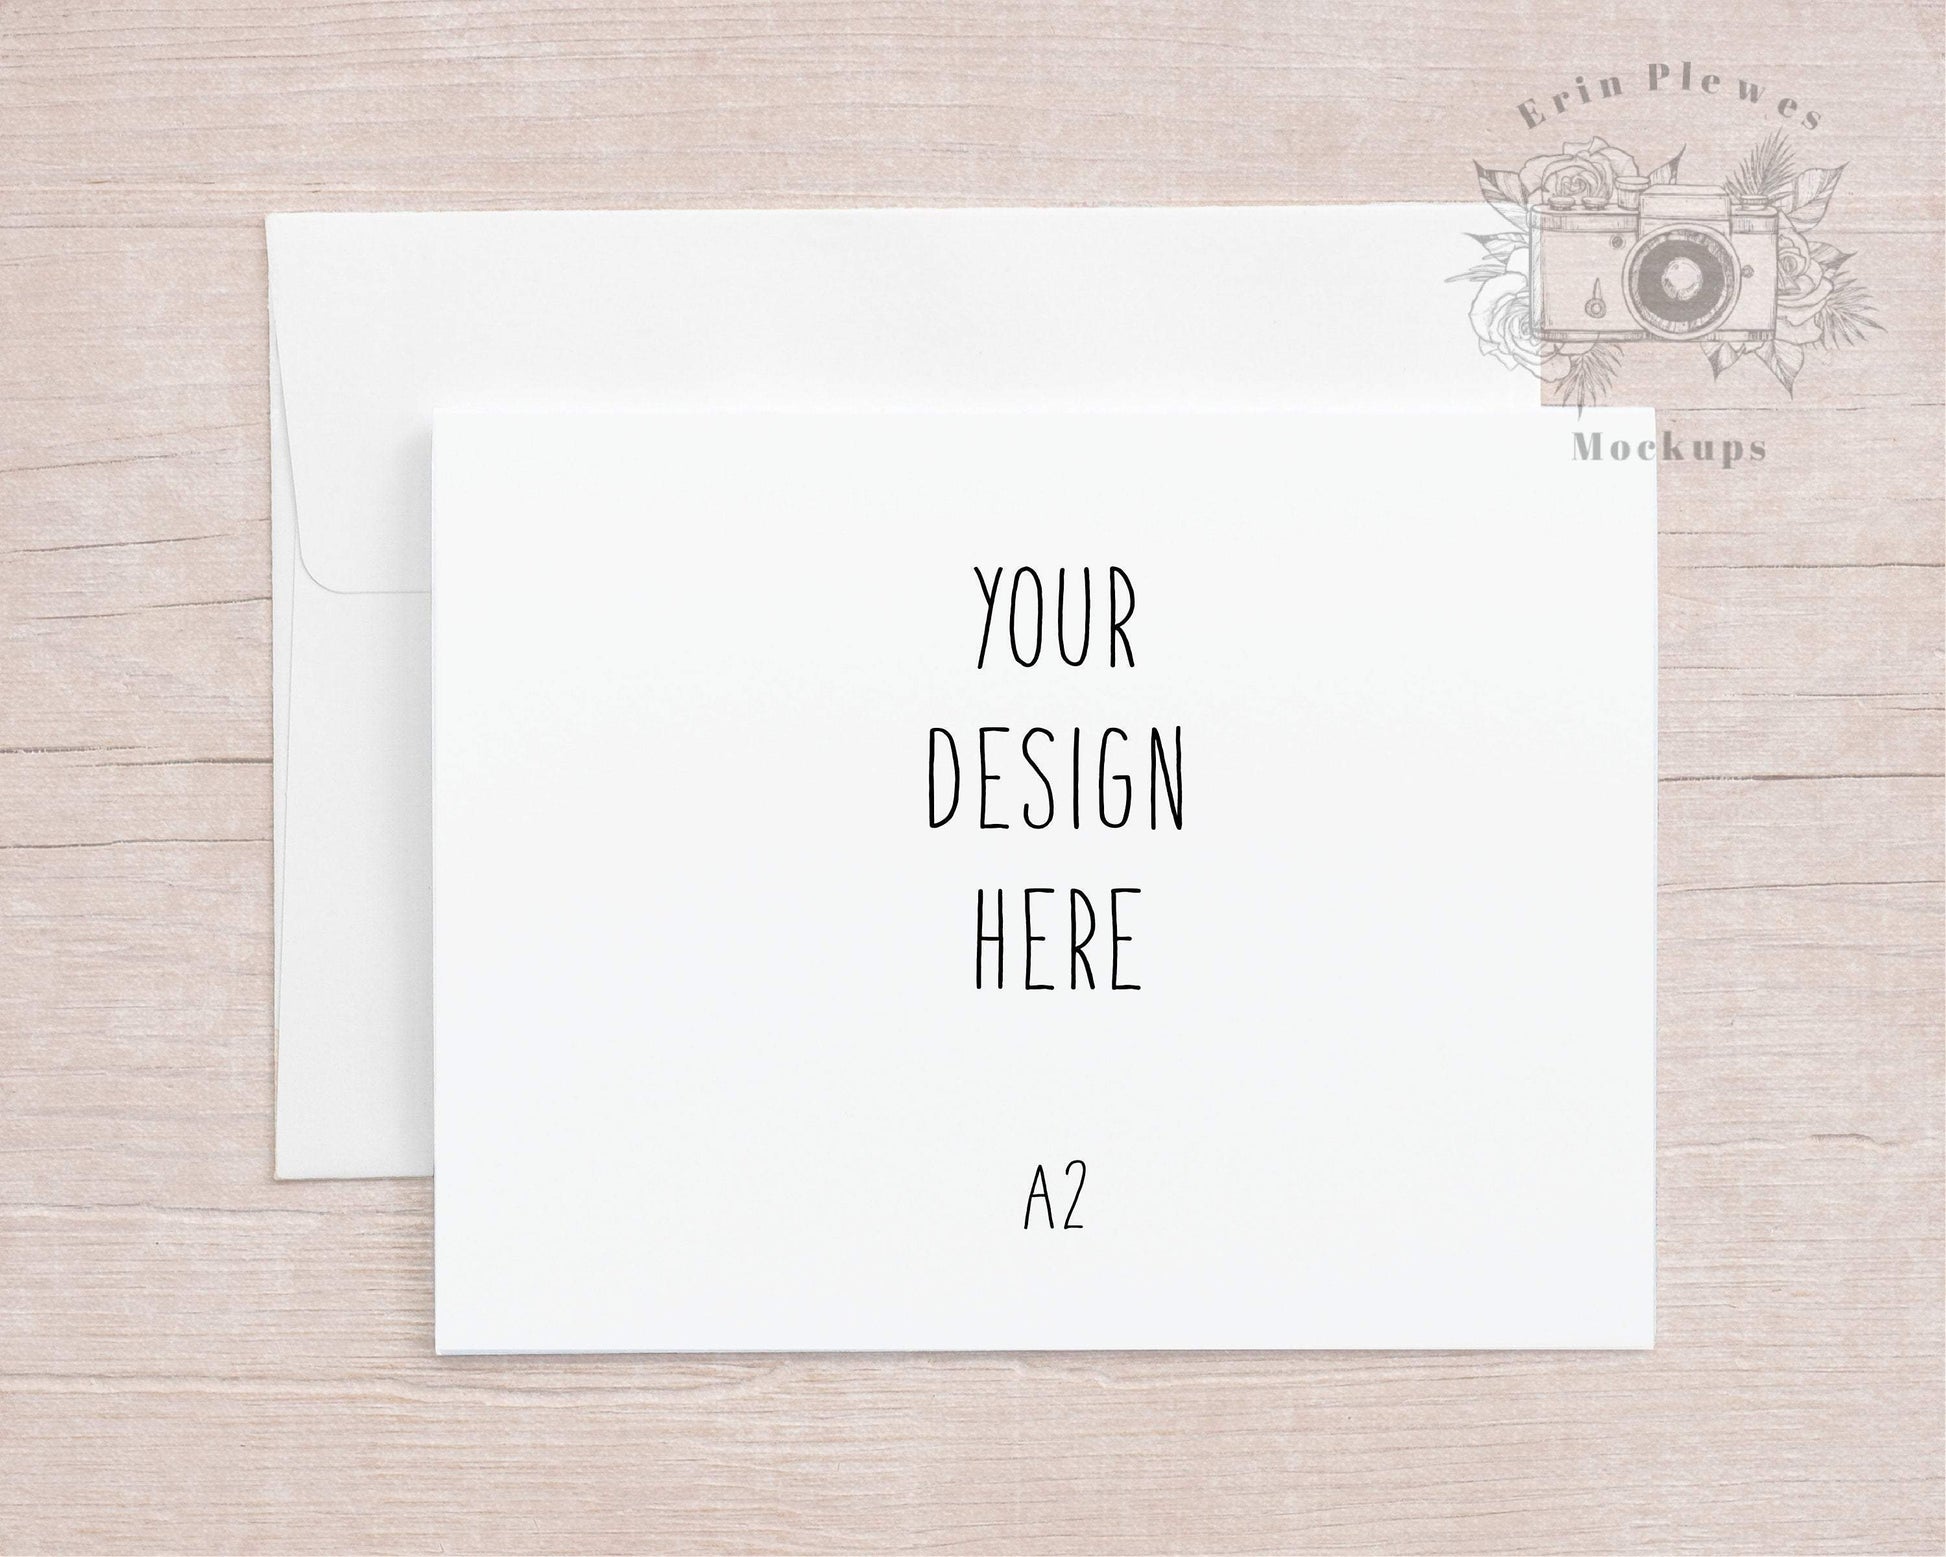 Erin Plewes Mockups A2 Greeting Card Mockup with White Envelope on Beige Wood, Thank You Card Mock Up for Rustic Wedding A-2, Jpeg Instant Digital Download